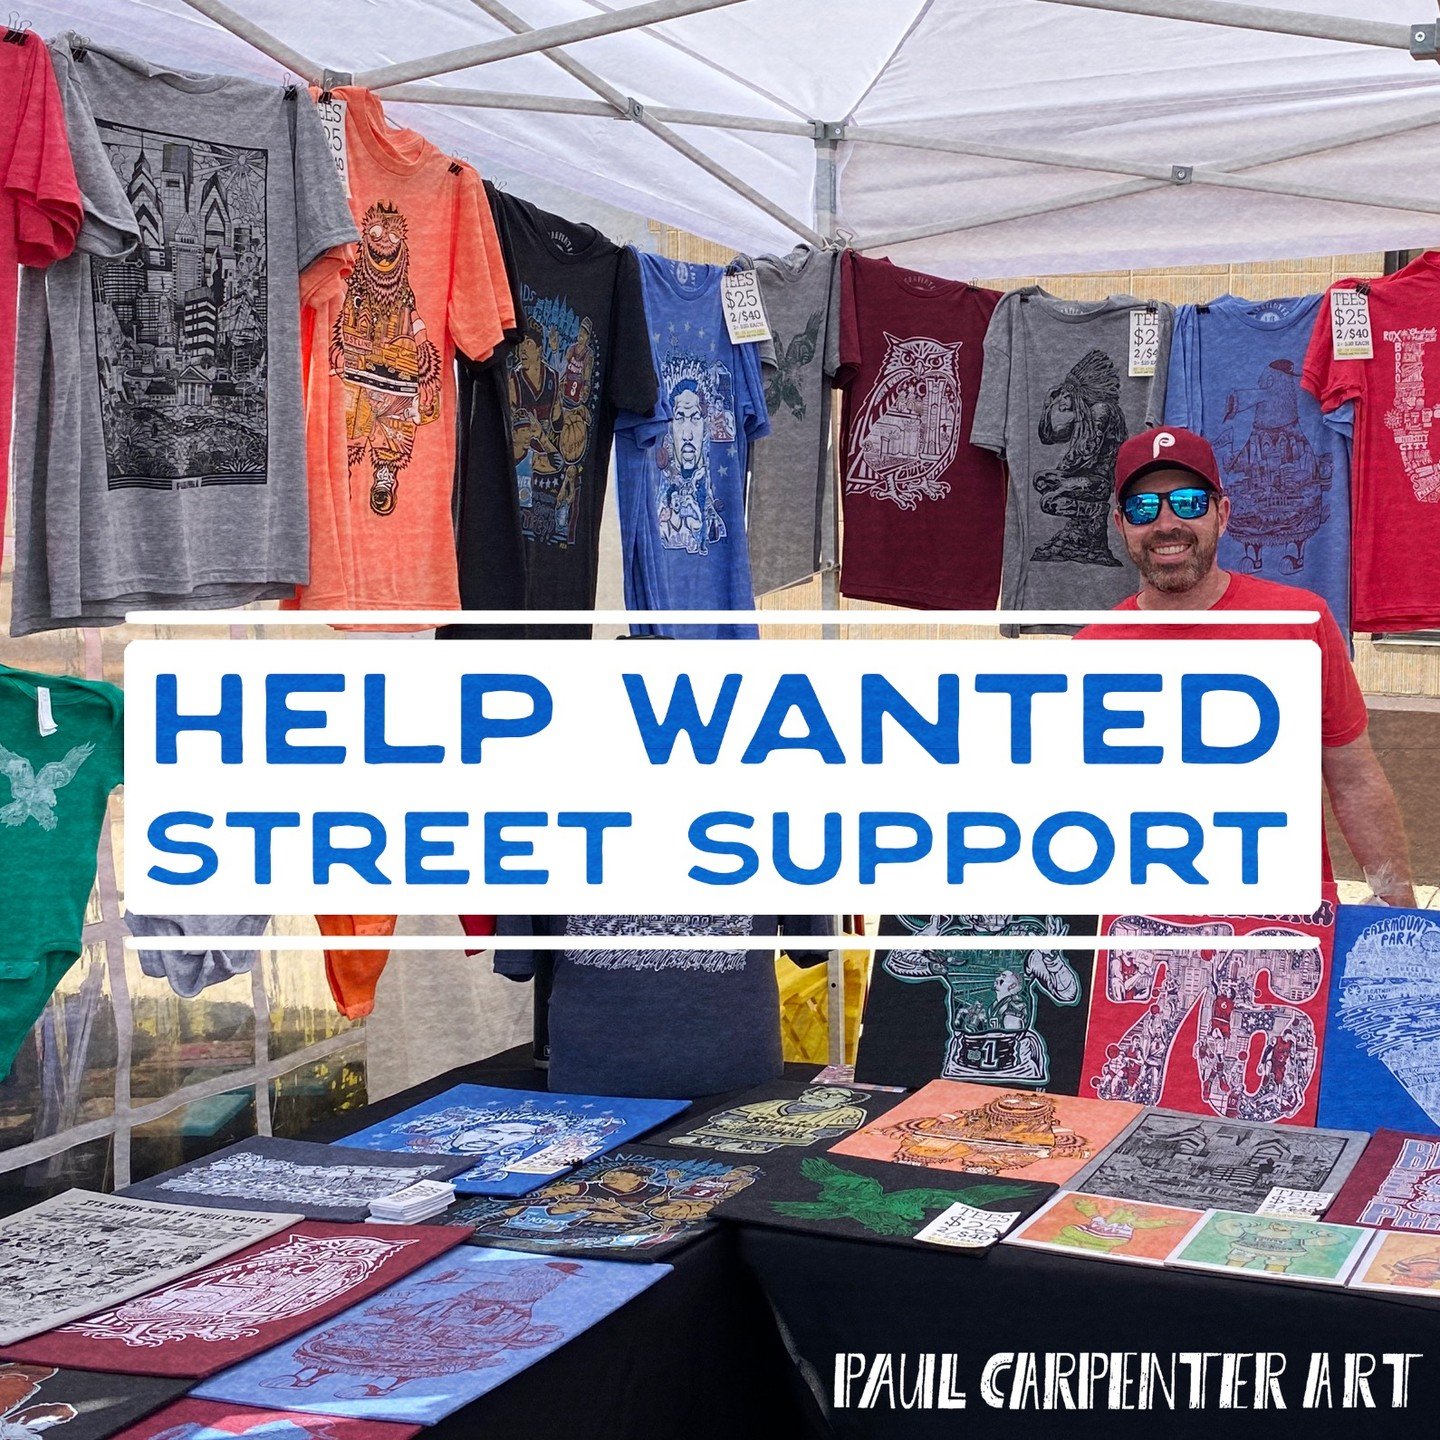 PAUL CARPENTER ART IS LOOKING FOR STREET FESTIVAL TEAM MEMBERS! Seasonal Weekend warriors to work outside at our weekend festivals on 5/19, 6/8, 6/15 and 6/22.

DM me if you can commit to ALL LISTED DATES and can fulfill the requirements/duties of th